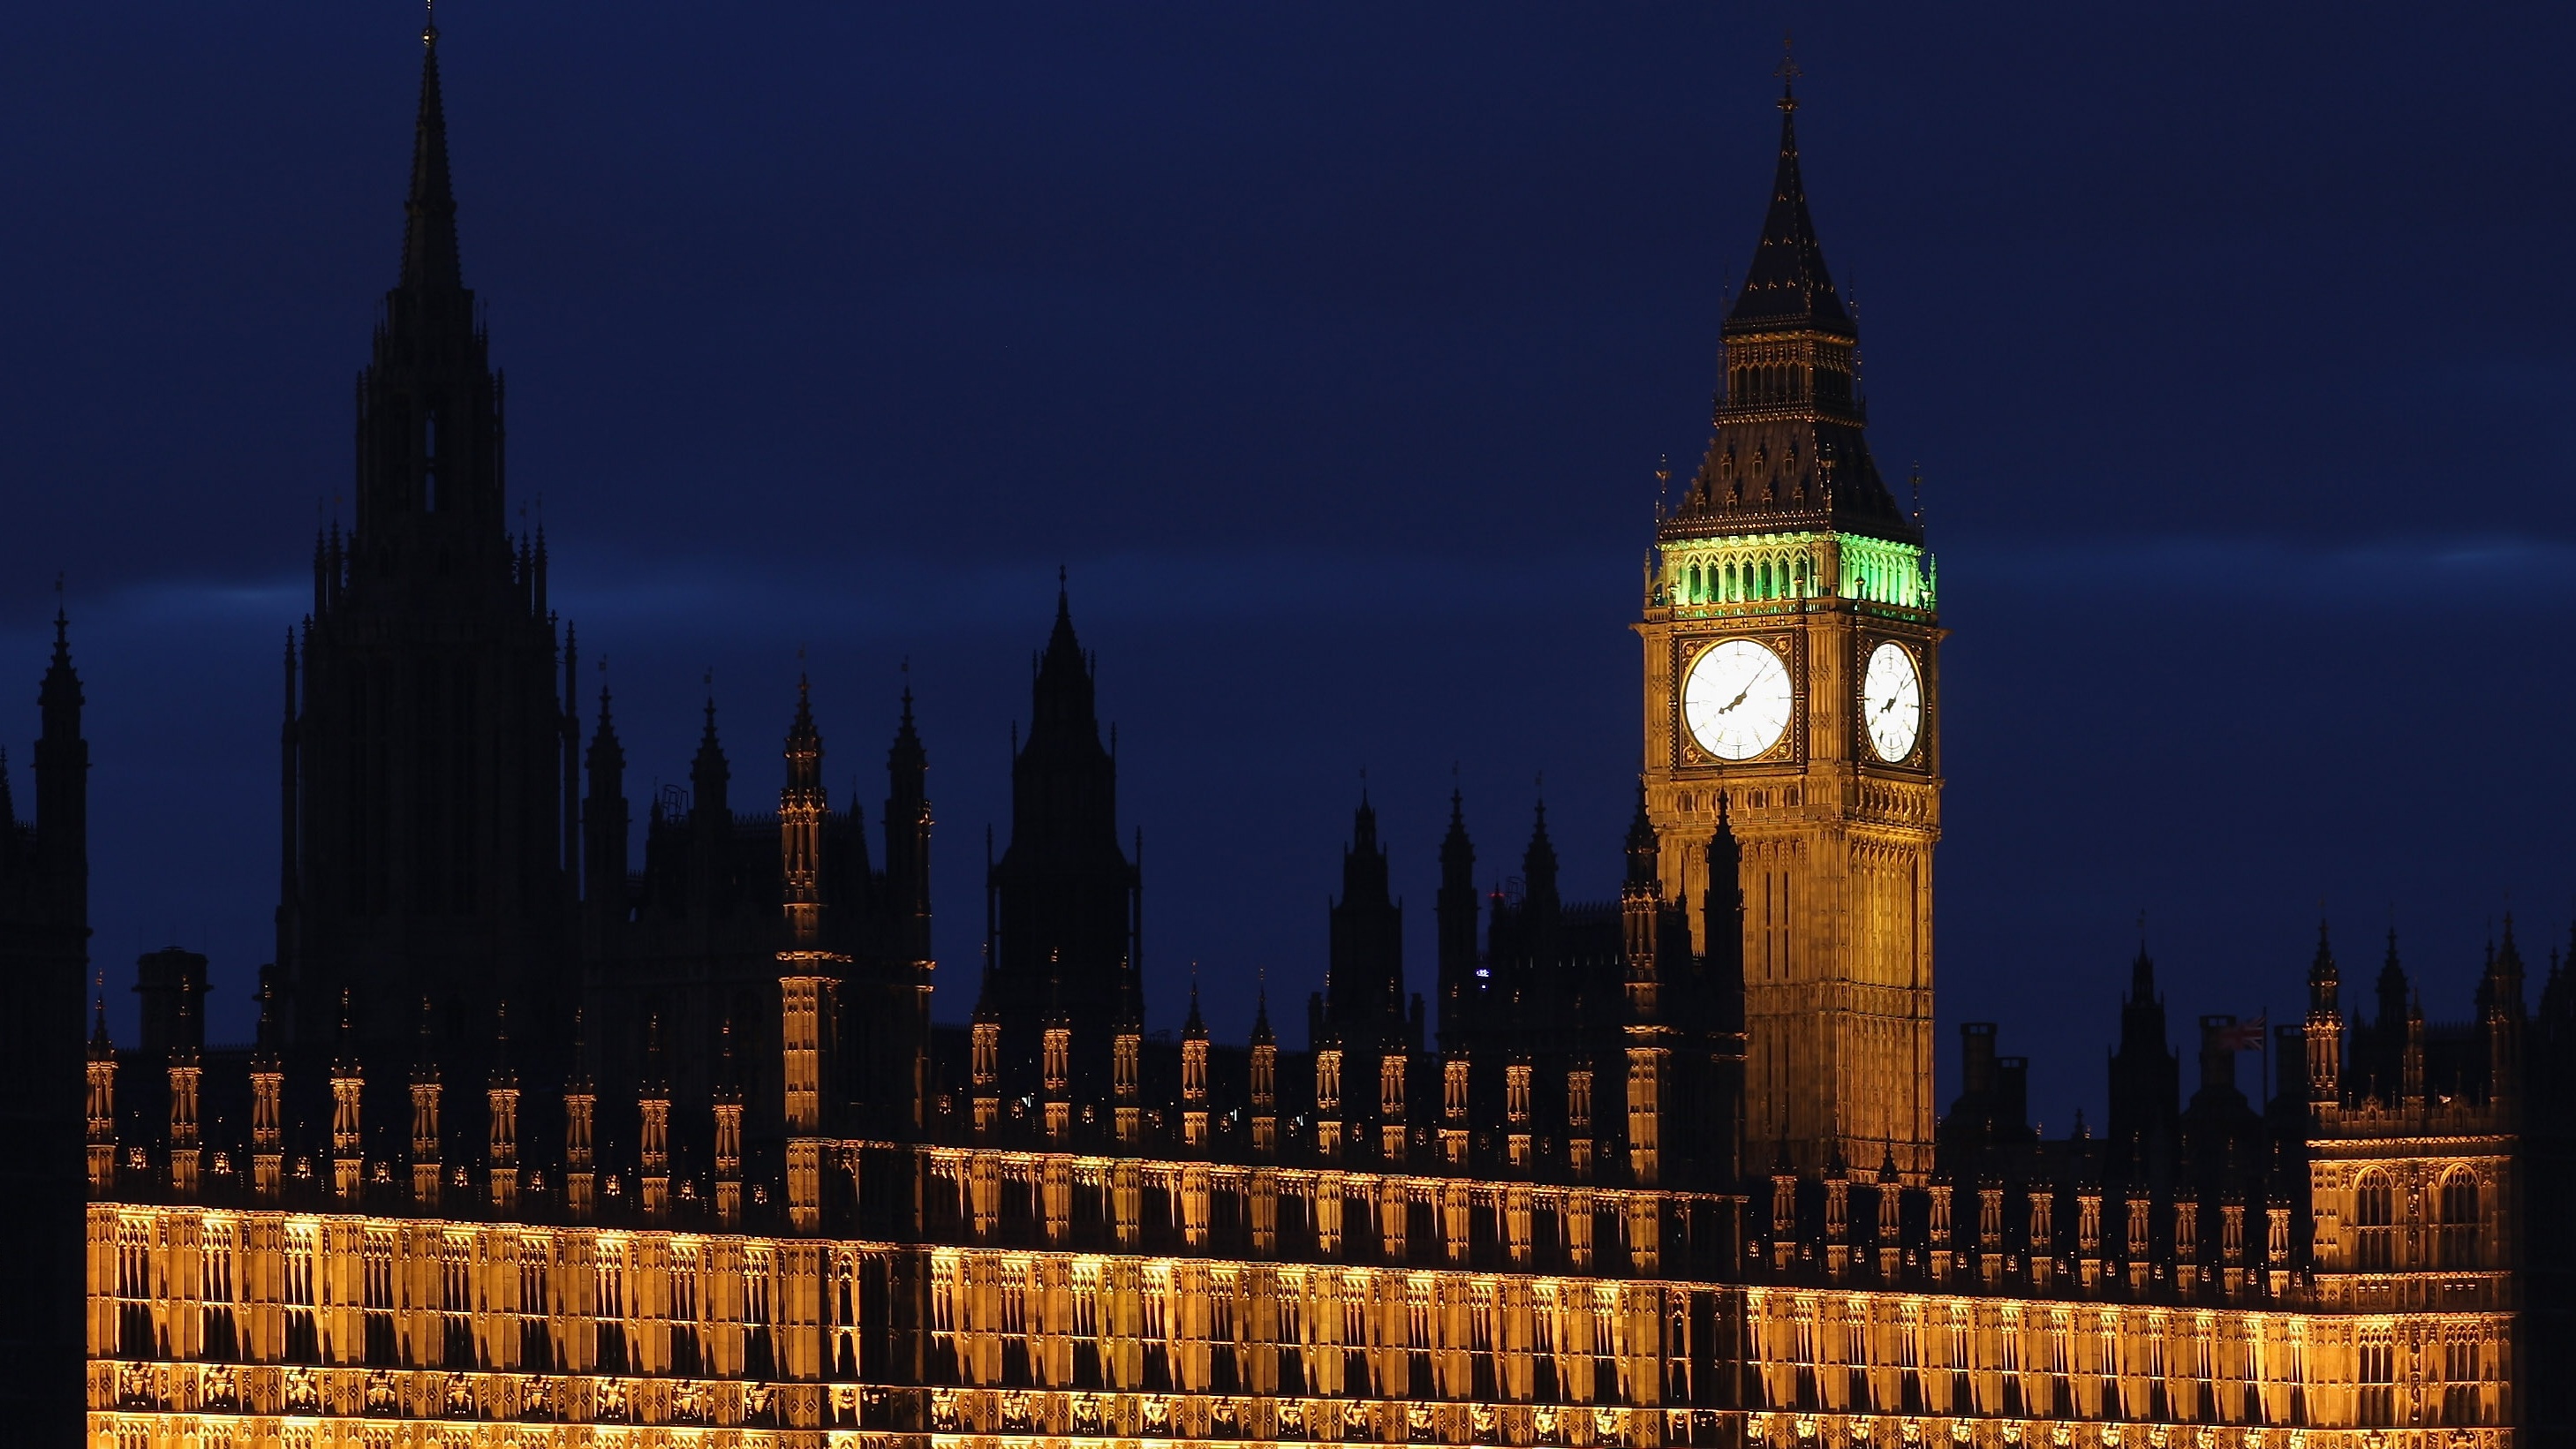 The Palace of Westminster pictured at night